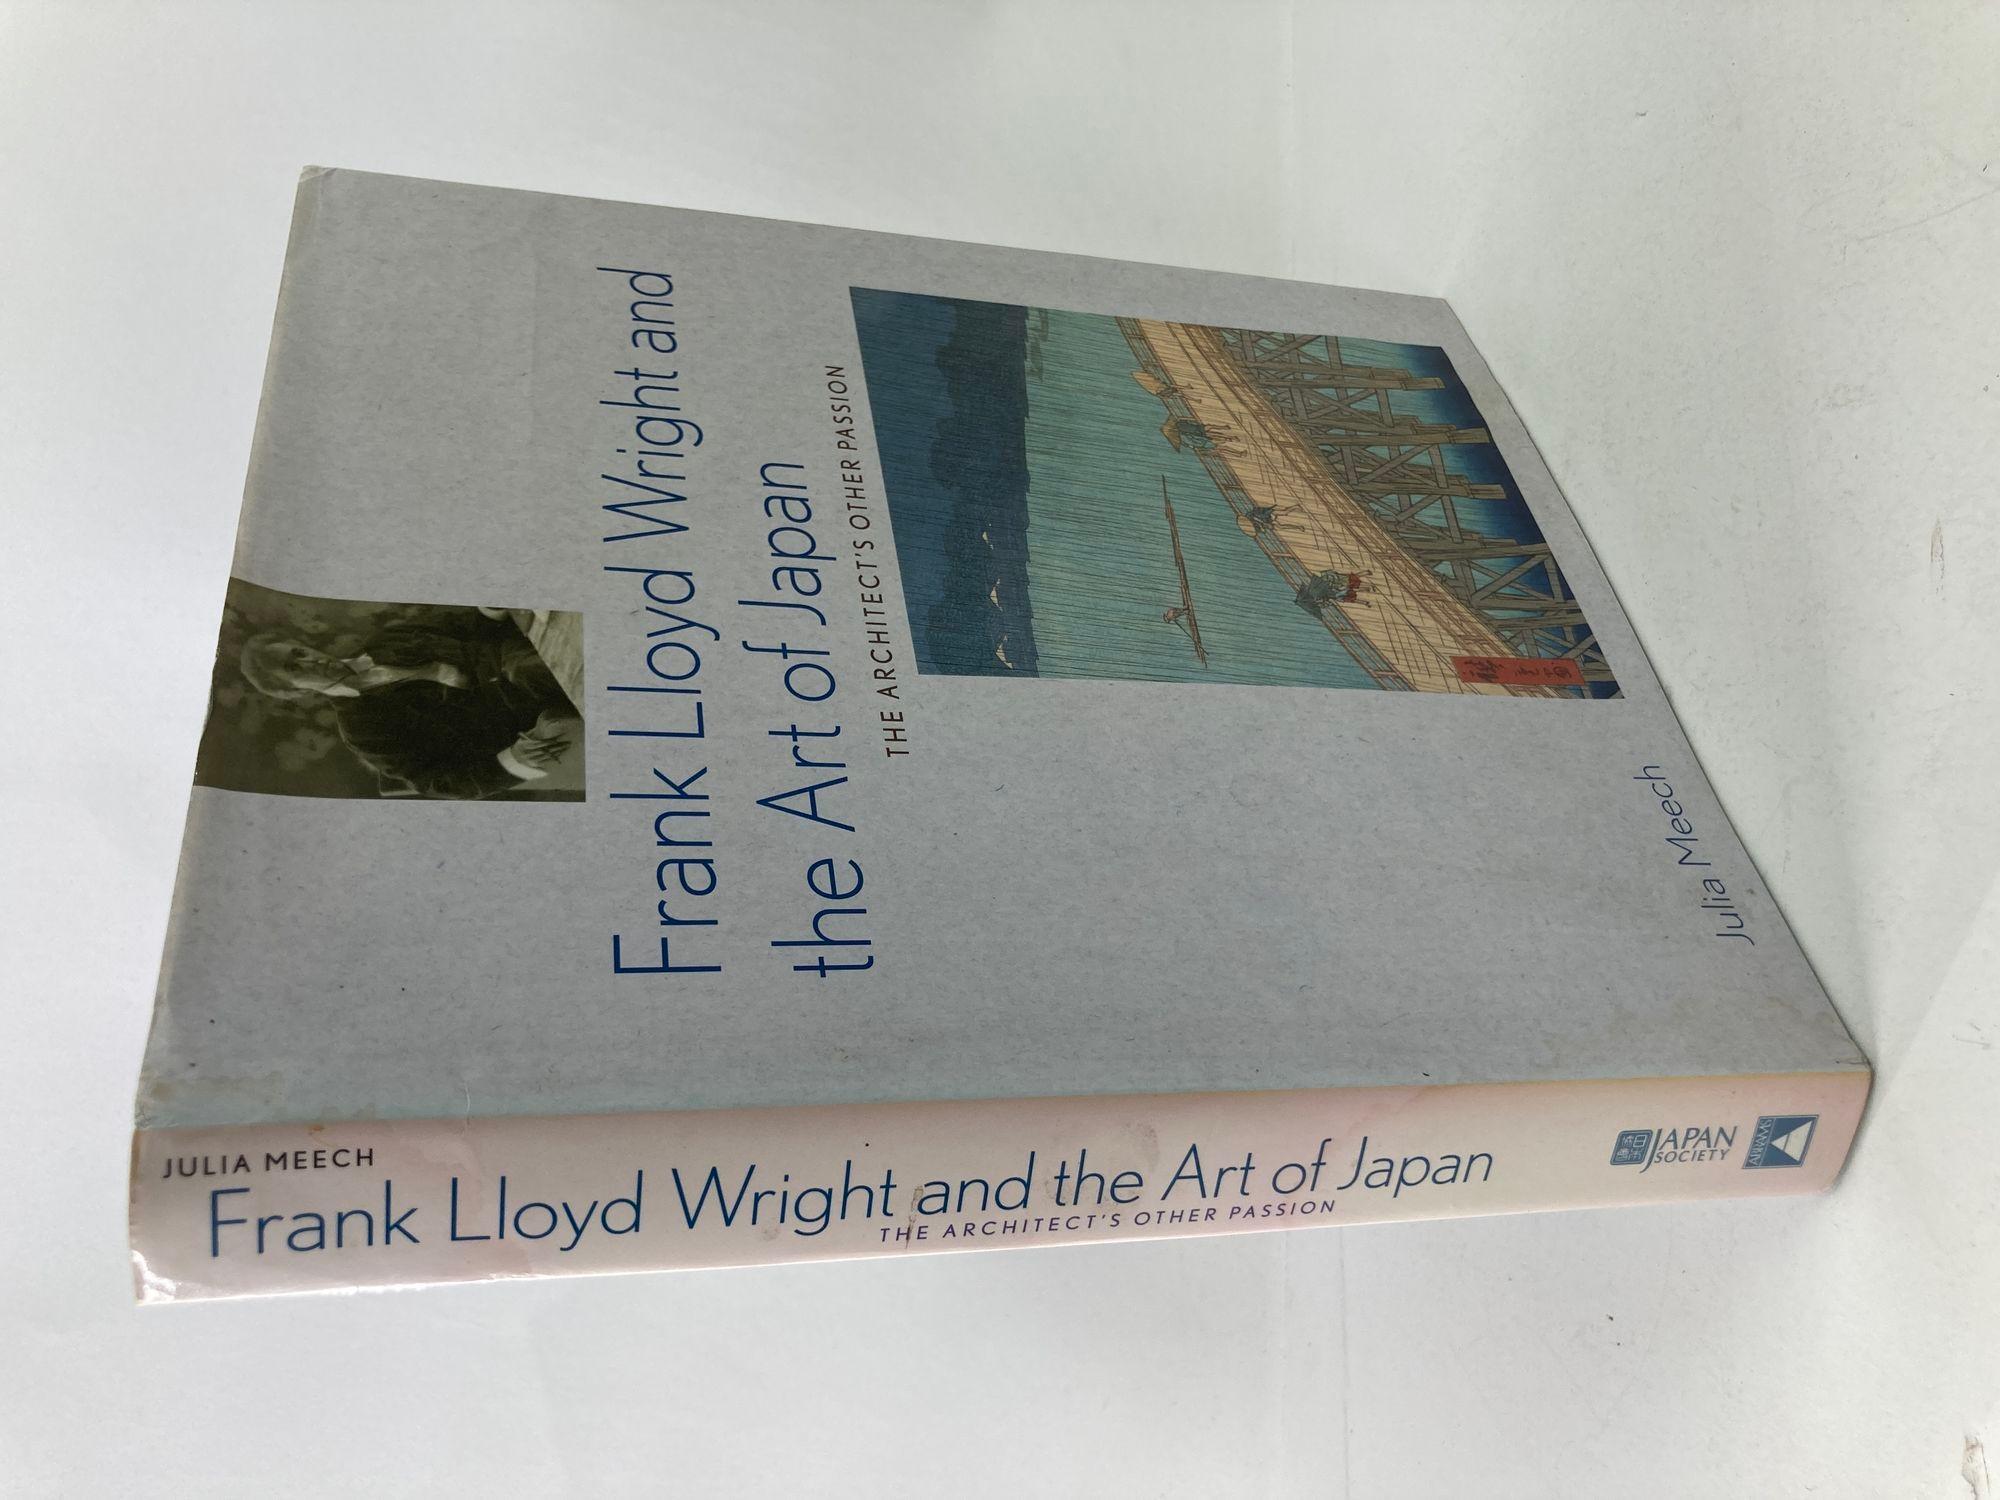 Frank Lloyd Wright and the Art of Japan: The Architects Other Passion by Julia Meech
Harry N. Abrams, 2001 - Architecture - 304 pages.
Renowned architect Frank Lloyd Wright was an avid and important collector and dealer of Asian art. His personal